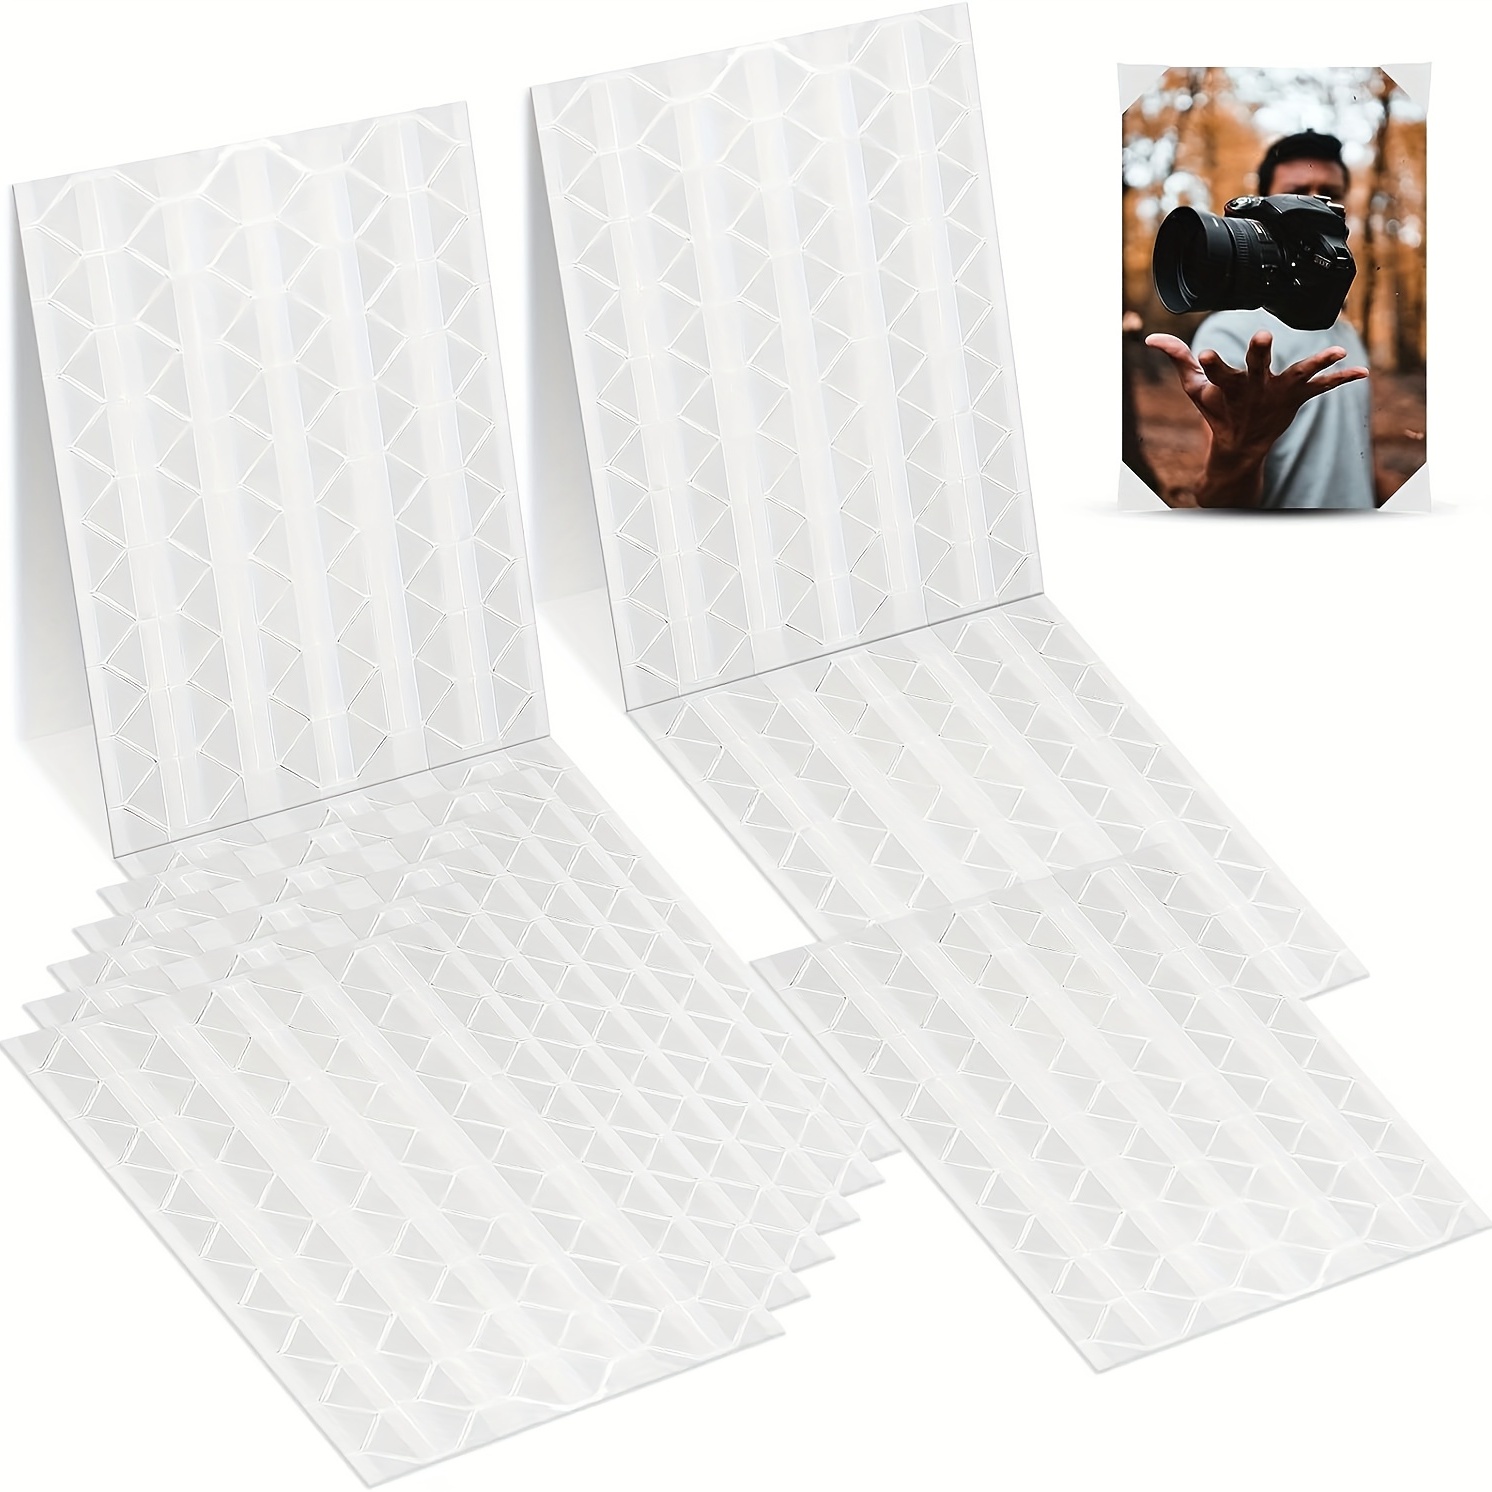 400 Pcs Photo Corners Self-Adhesive Picture Mounting Corner Stickers Clear  New